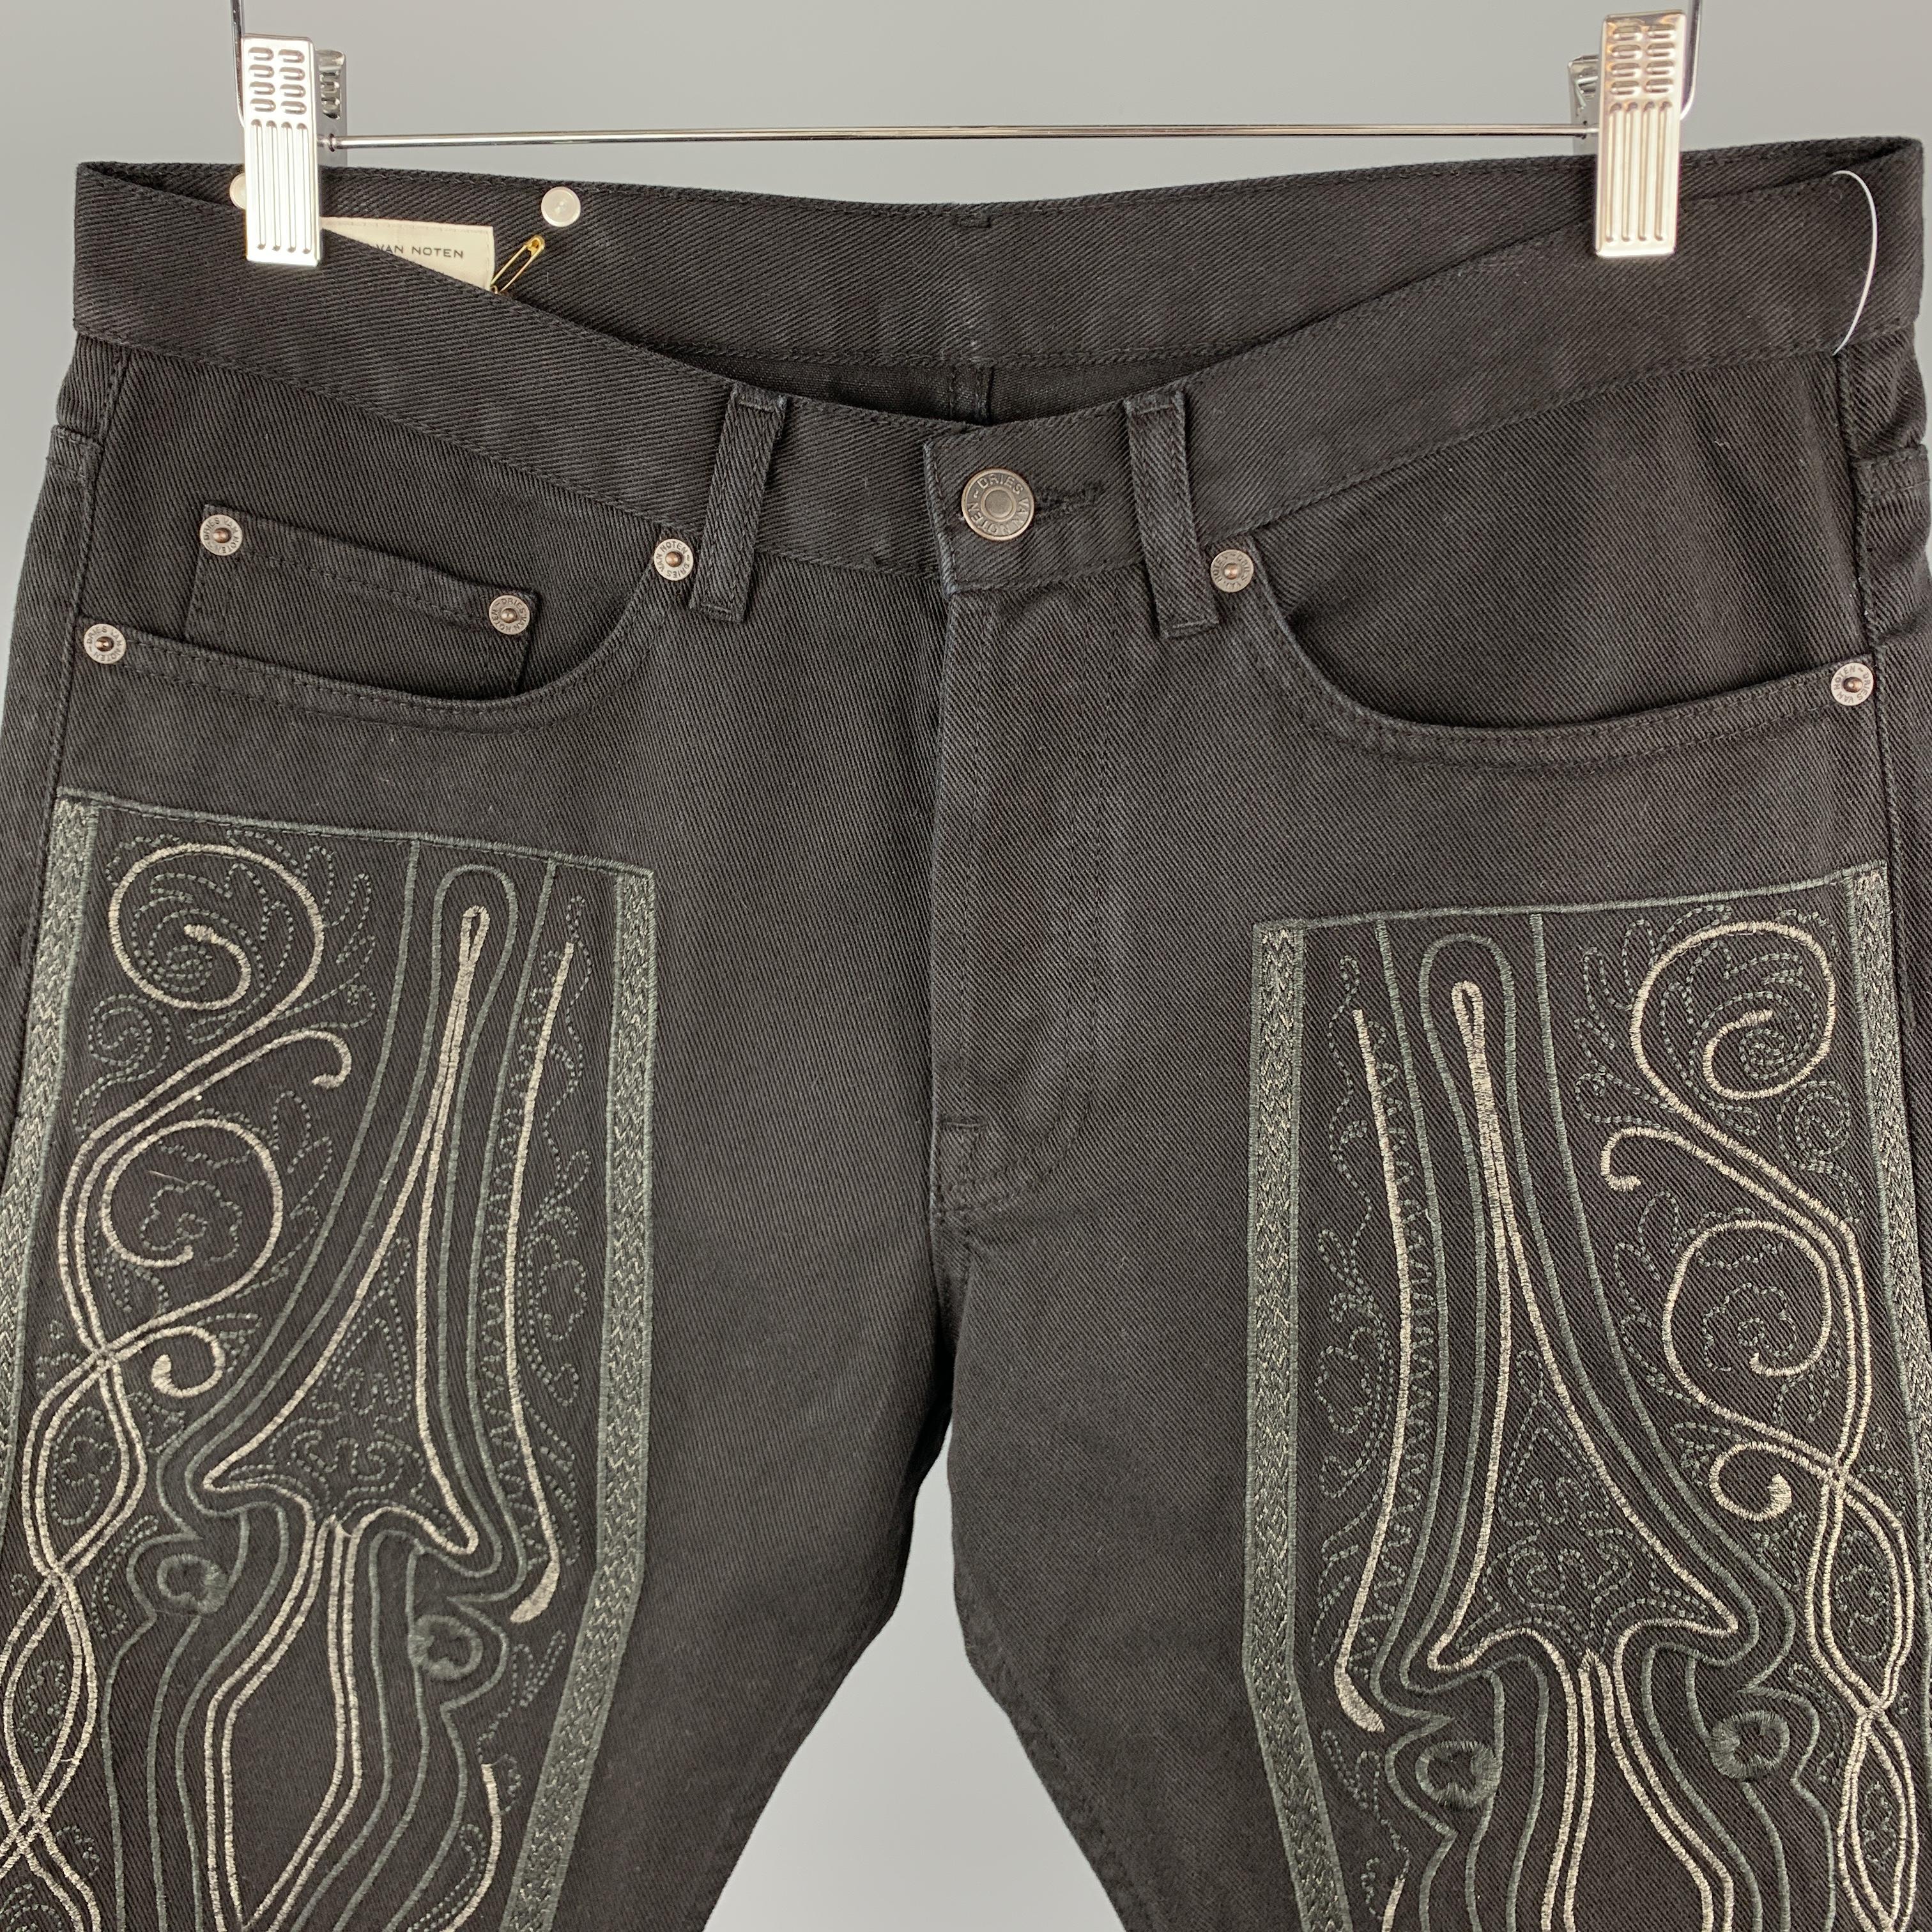 DRIES VAN NOTEN Shorts comes in a black tone in a solid denim material, with an embroidery at front, a leather tag, button fly, in a five pockets style. 

Excellent Pre-Owned Condition.
Marked: 31

Measurements:

Waist: 33 in. 
Rise: 9.5 in.